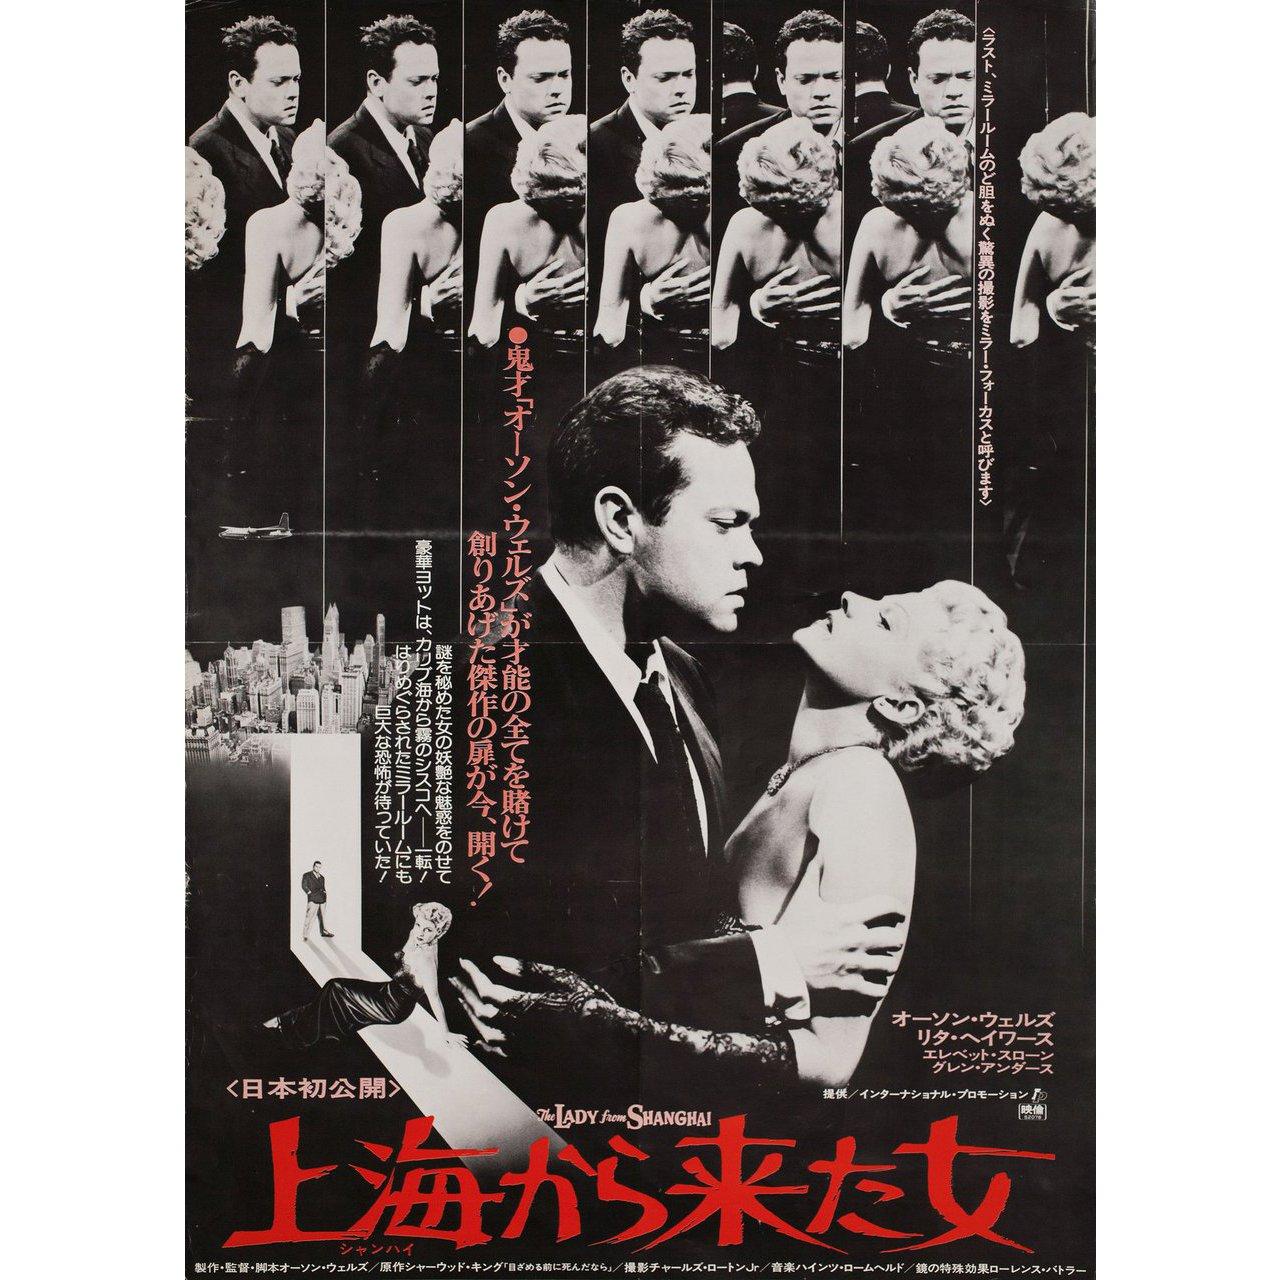 Original 1977 Japanese B2 poster for the first Japanese theatrical release of the 1947 film The Lady from Shanghai directed by Orson Welles with Rita Hayworth / Orson Welles / Everett Sloane / Glenn Anders. Very Good-Fine condition, rolled. Many